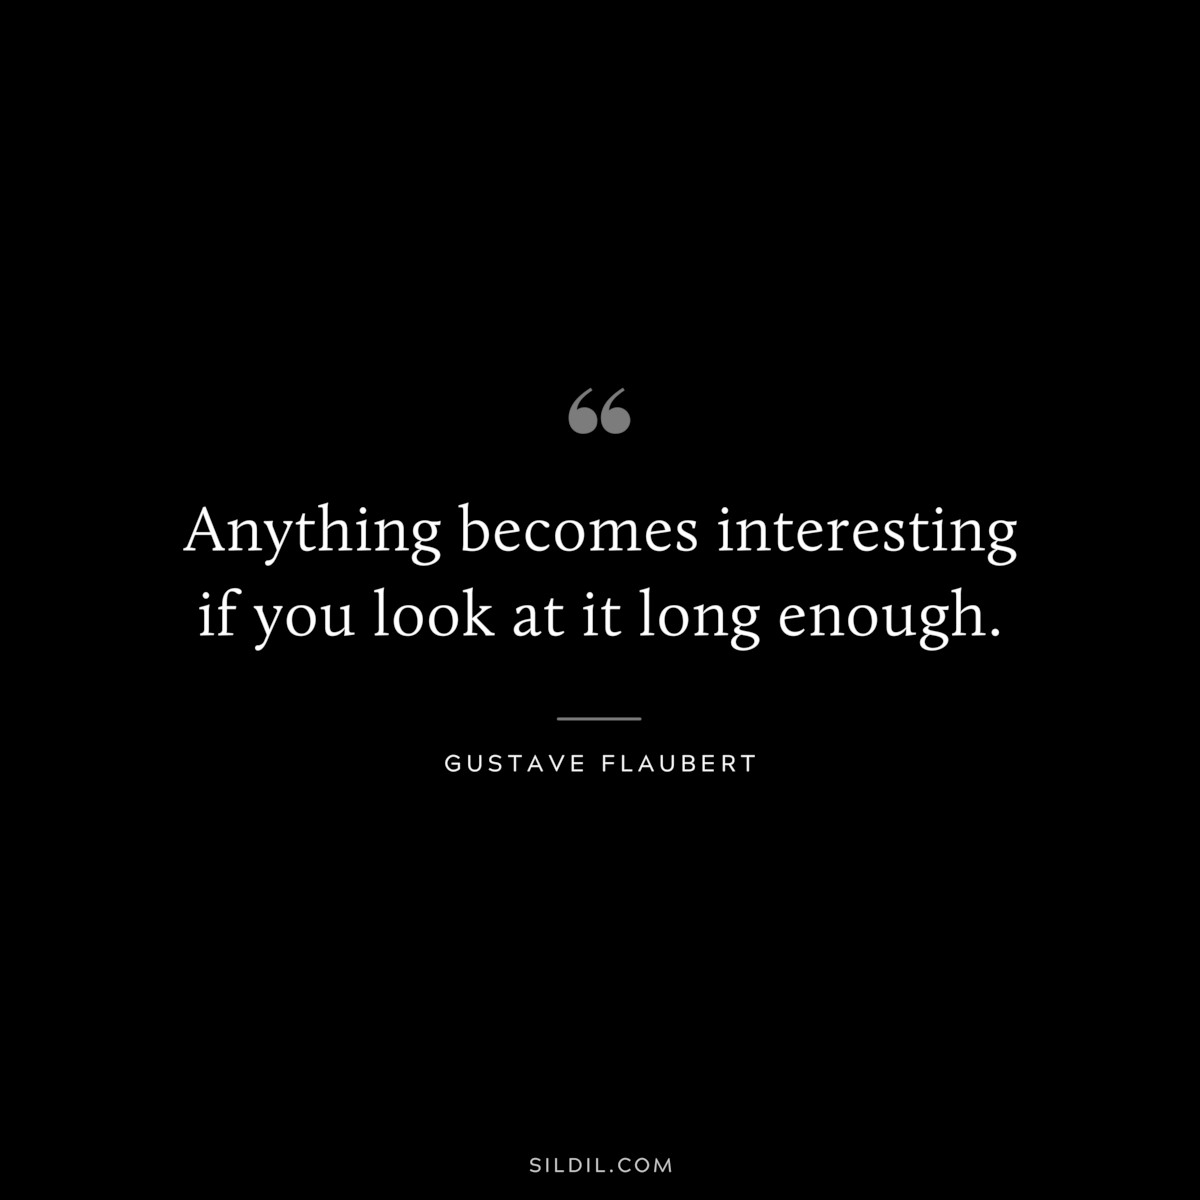 Anything becomes interesting if you look at it long enough. ― Gustave Flaubert